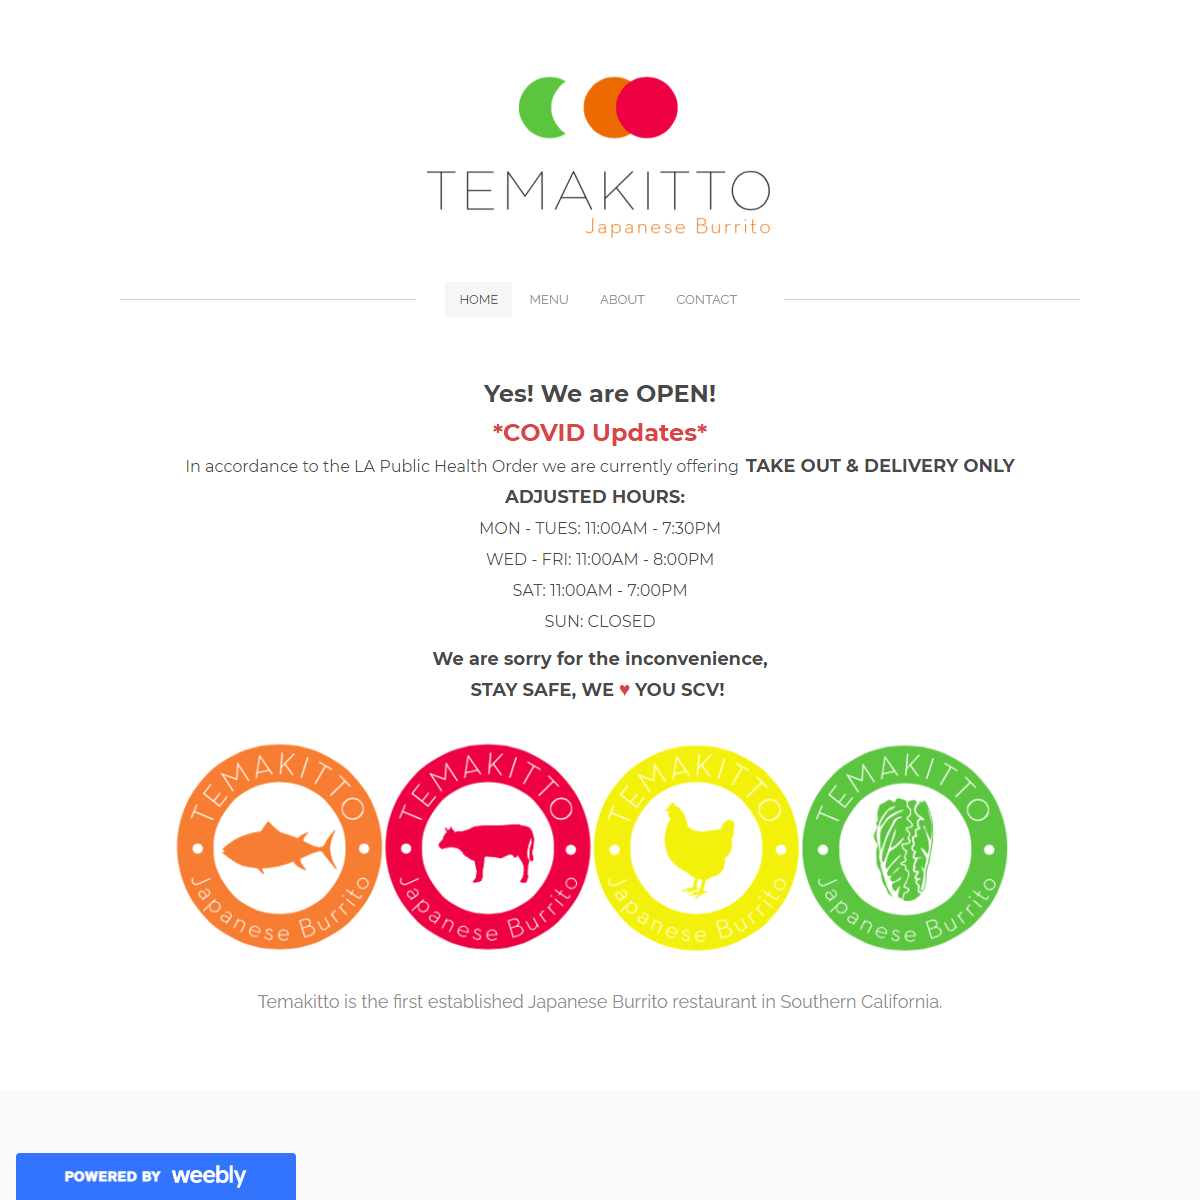 A complete backup of https://temakitto.weebly.com/